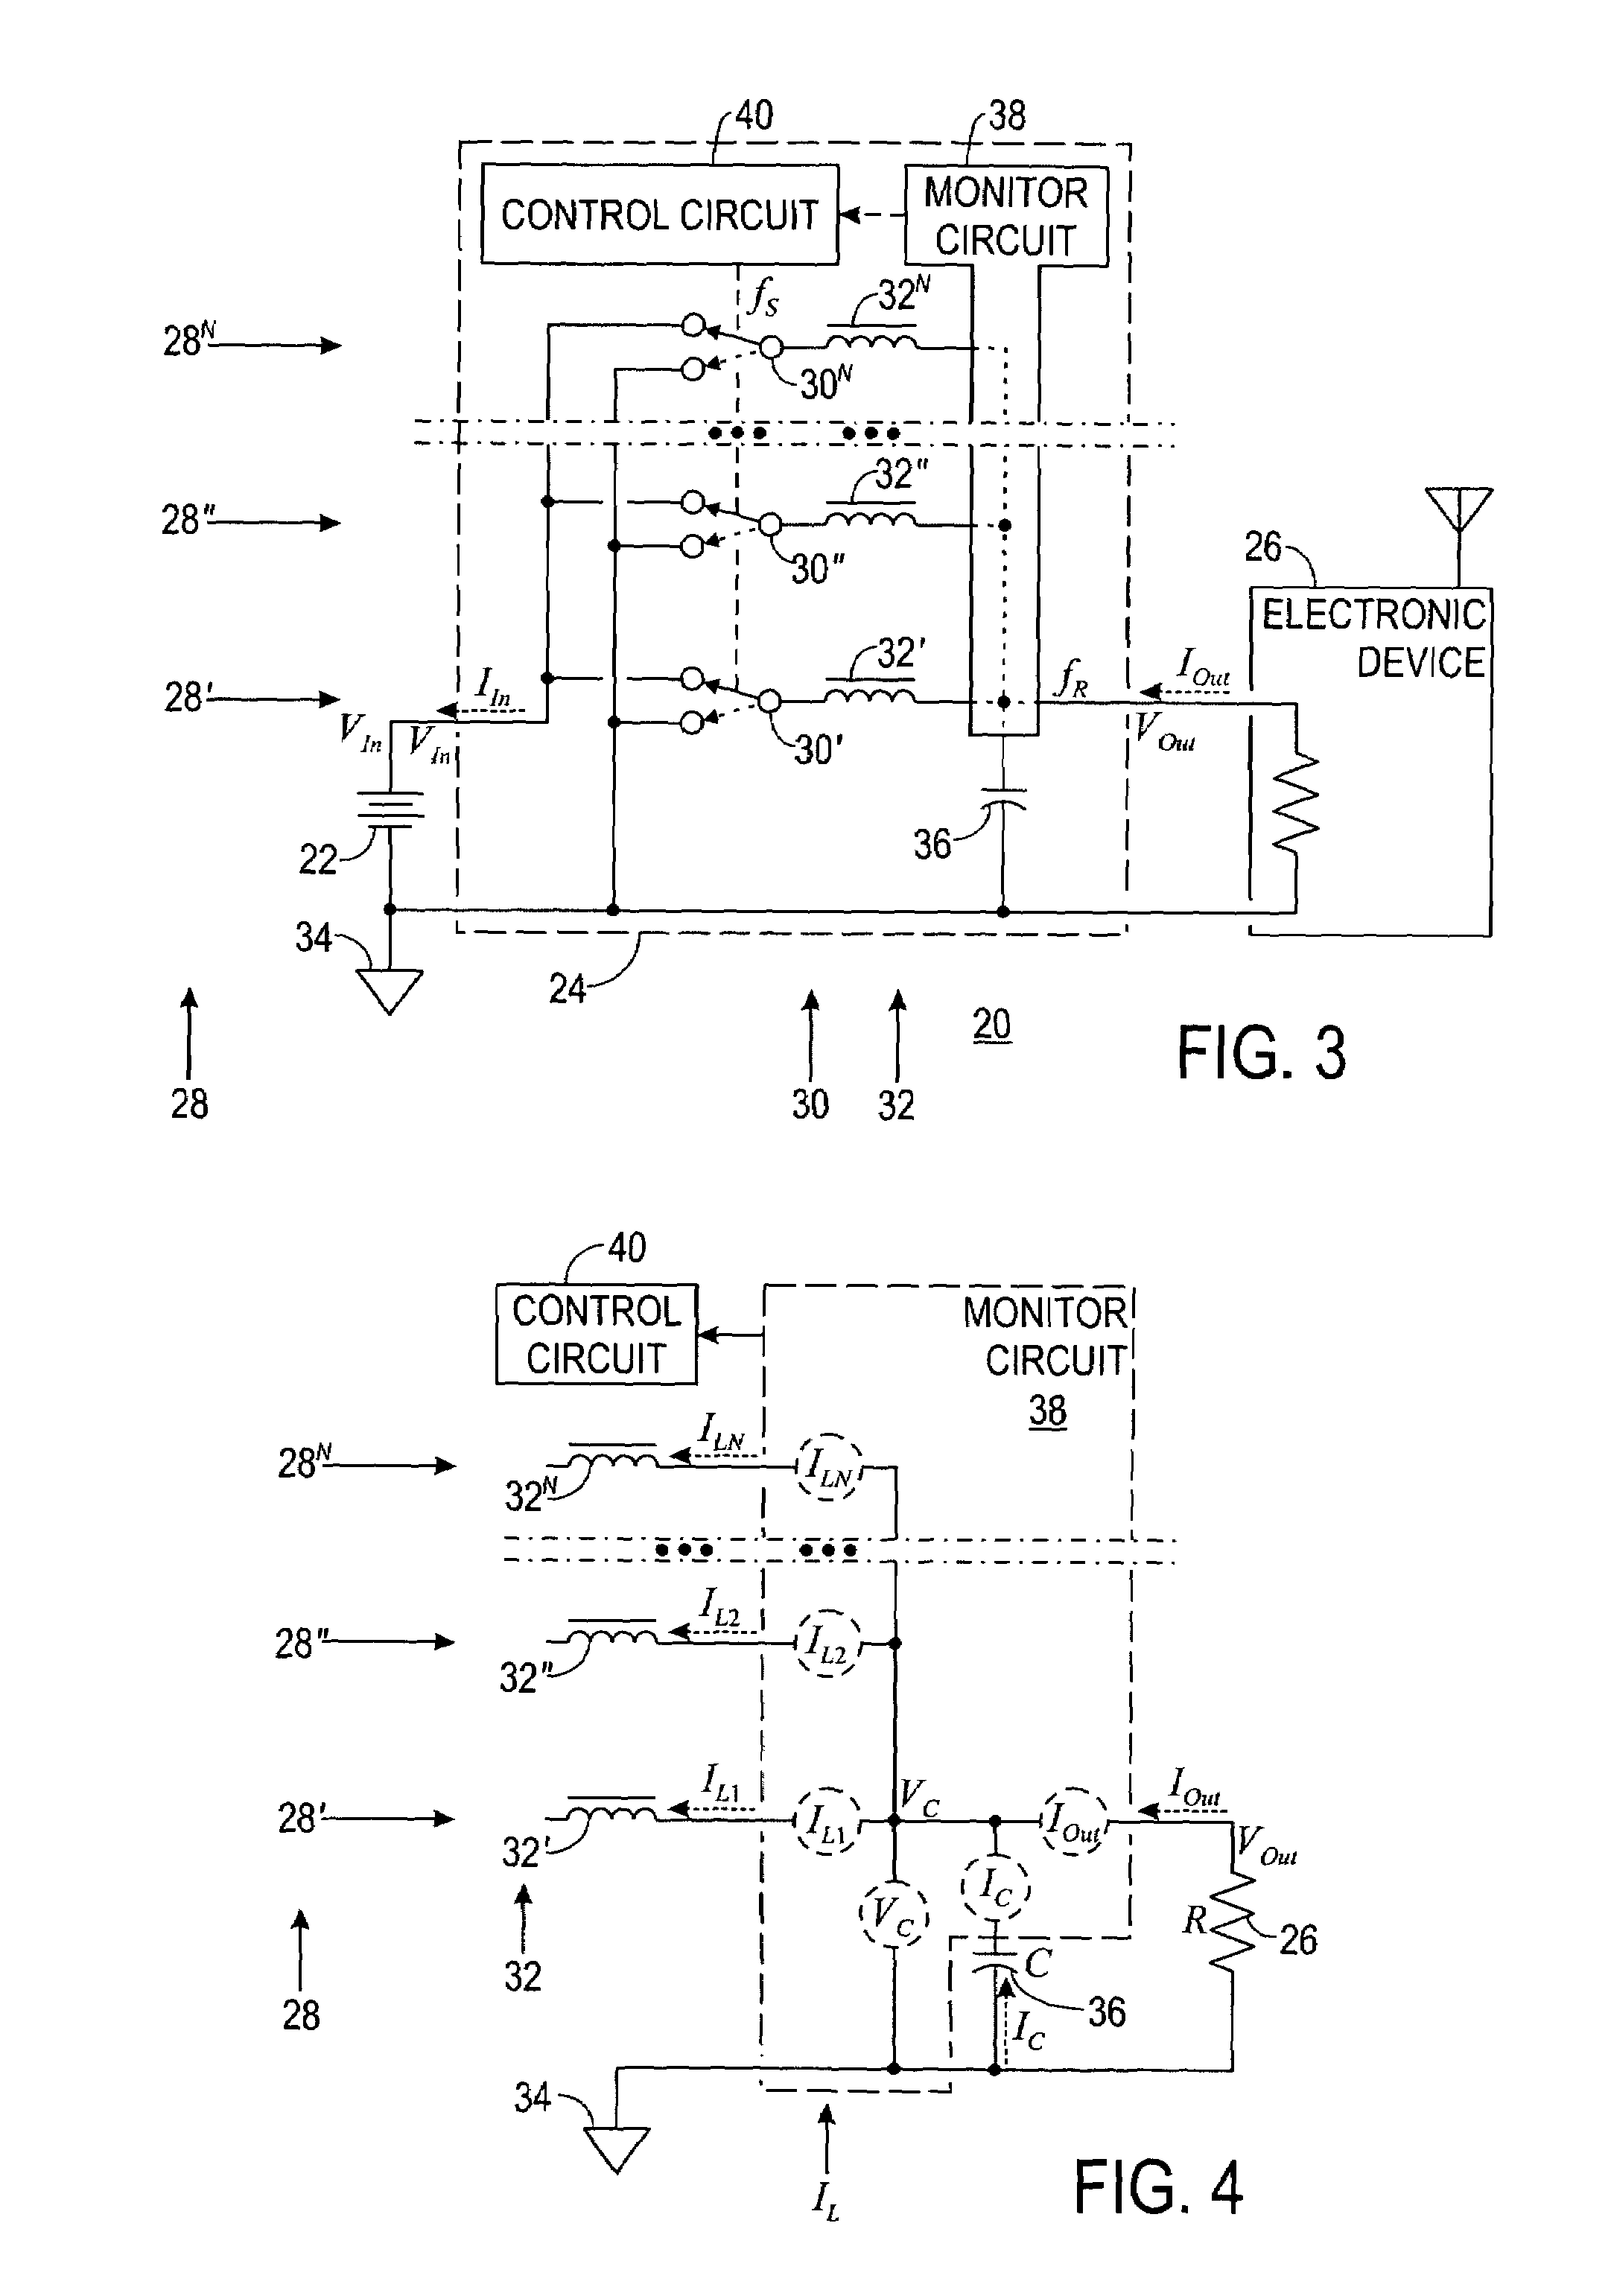 Apparatus and method for fixed-frequency control in a switching power supply